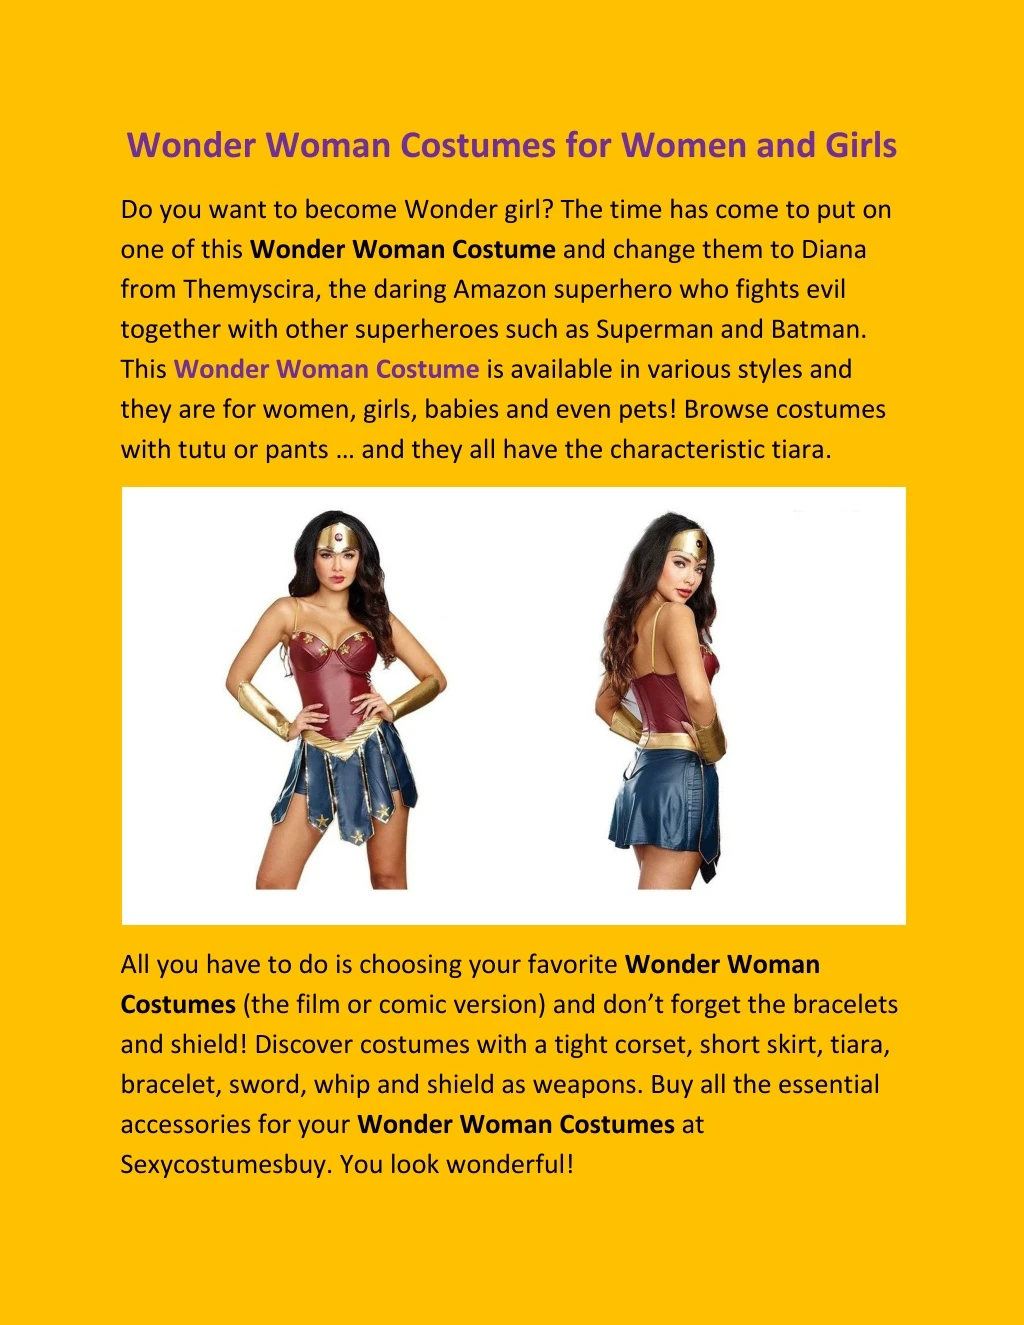 wonder woman costumes for women and girls n.